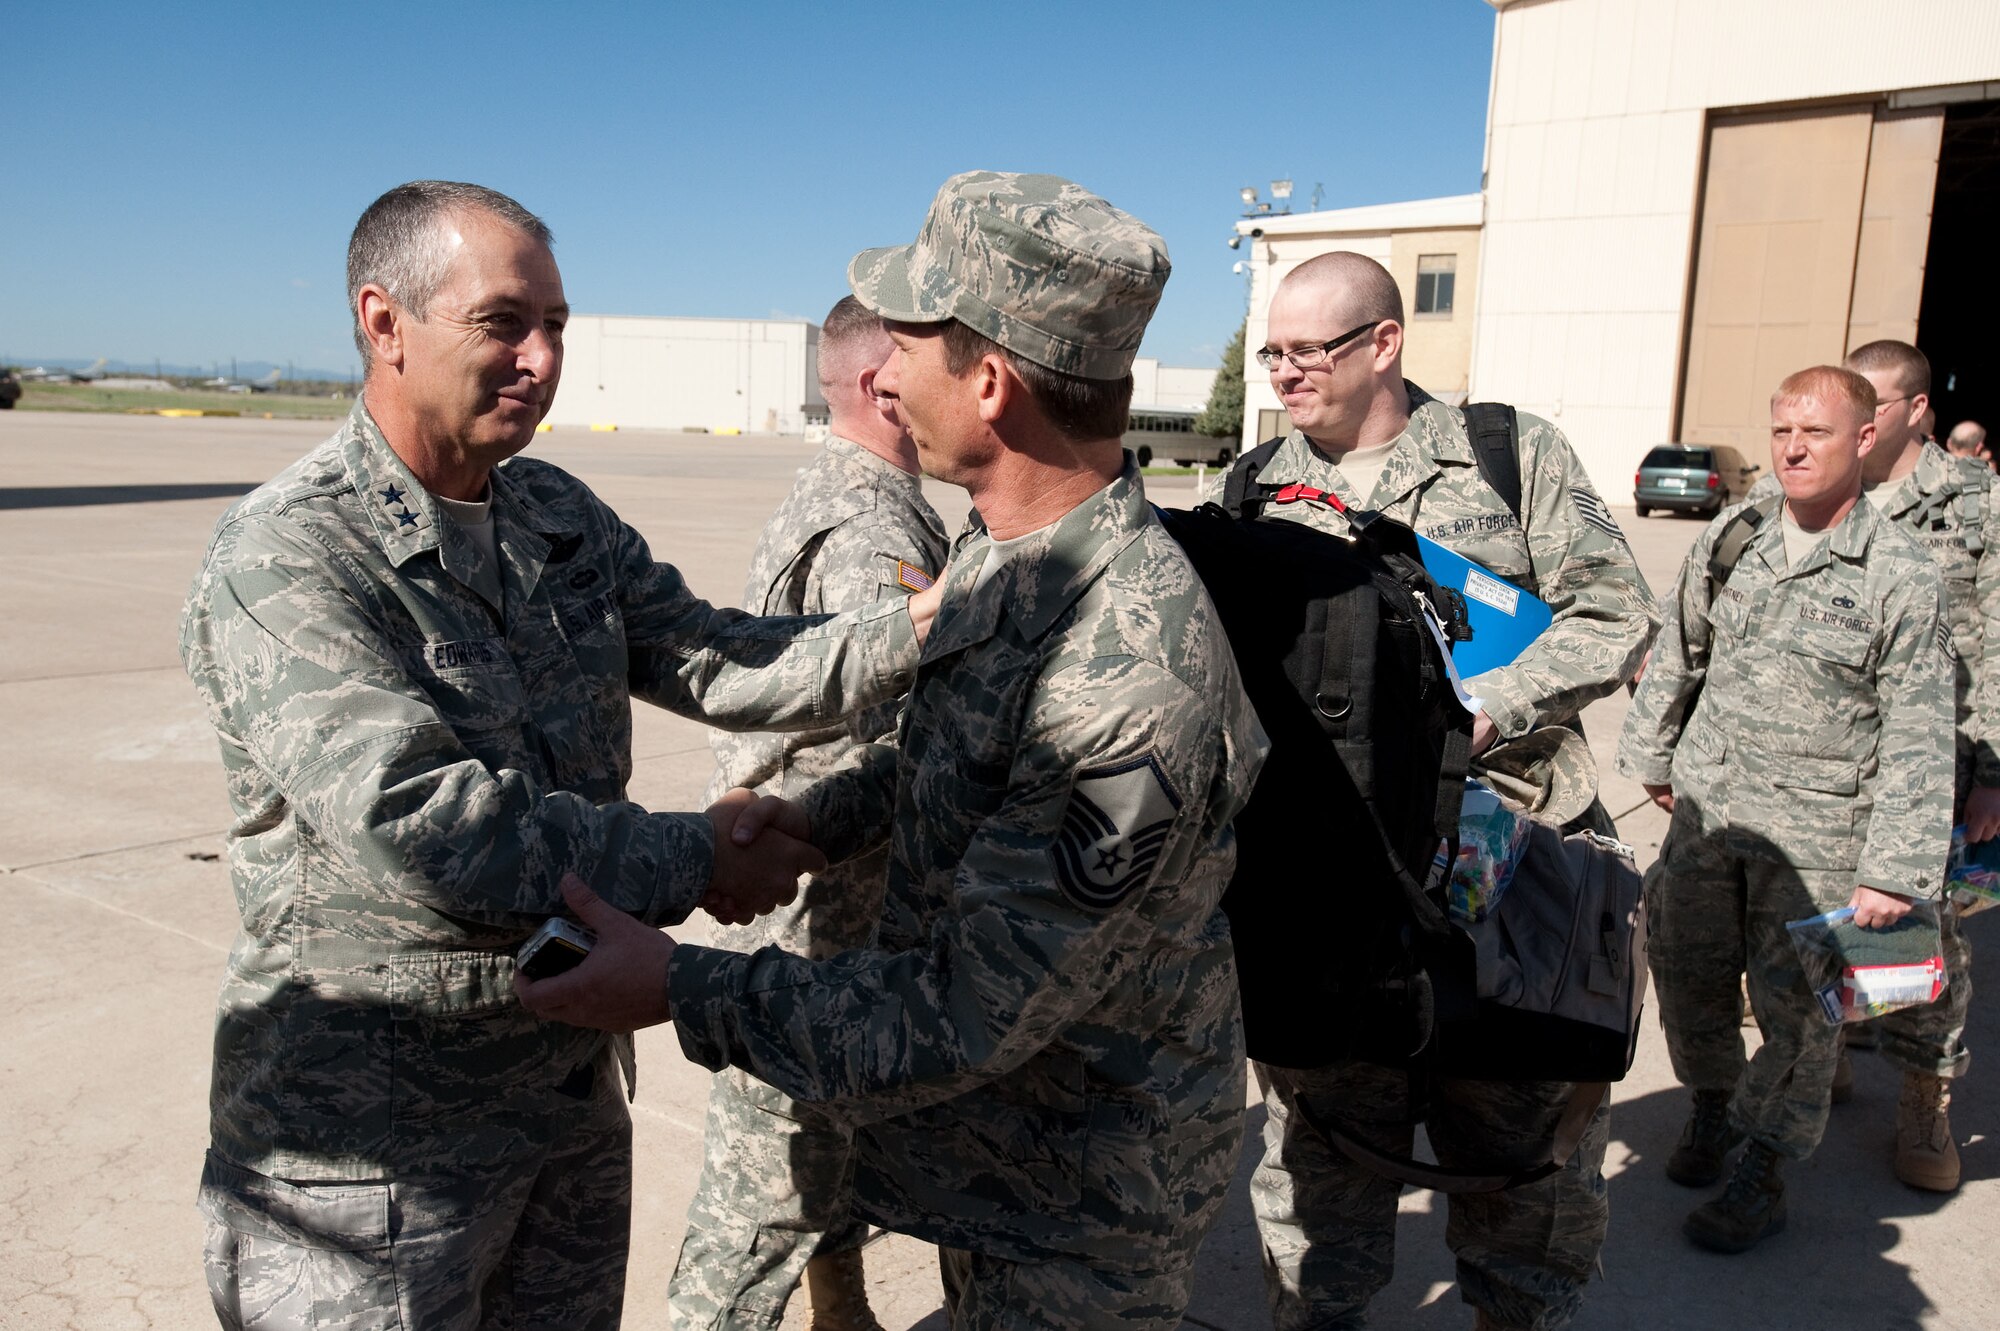 Major General H. Michael Edwards, Adjutant General, Colorado National Guard greets each Airman before they depart for Iraq. More than 200 Colorado Air National Guardsman are deploying in support of Operation Iraqi Freedom. (U.S. Air Force photo/Master Sgt. John Nimmo, Sr.) (RELEASED)